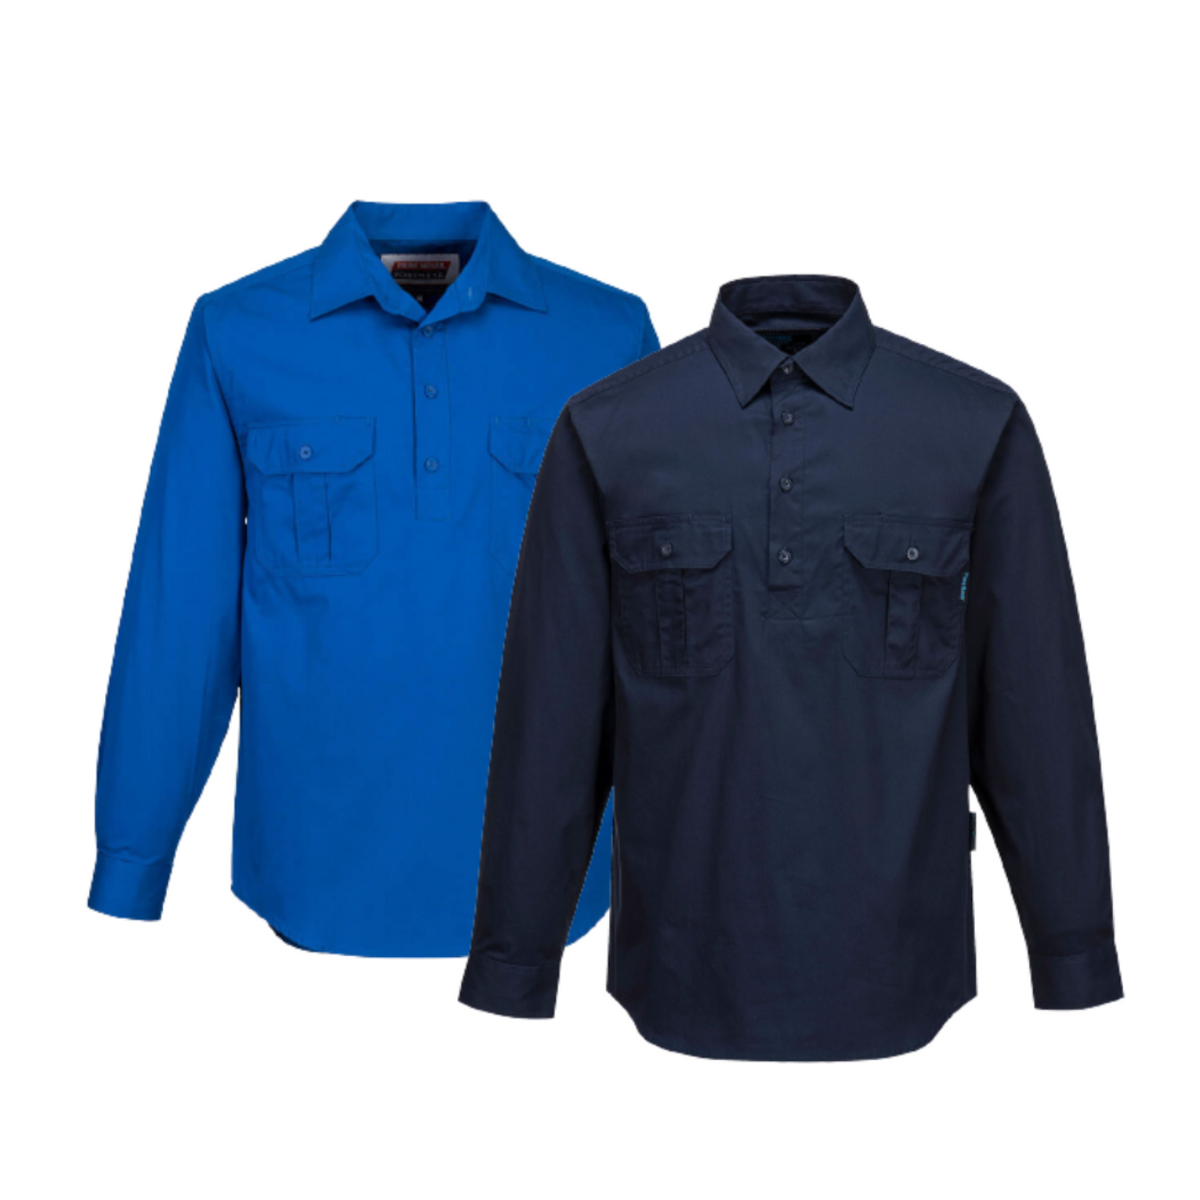 Portwest Adelaide Shirt, Long Sleeve, Light Weight Cotton Polo Shirt MC903-Collins Clothing Co